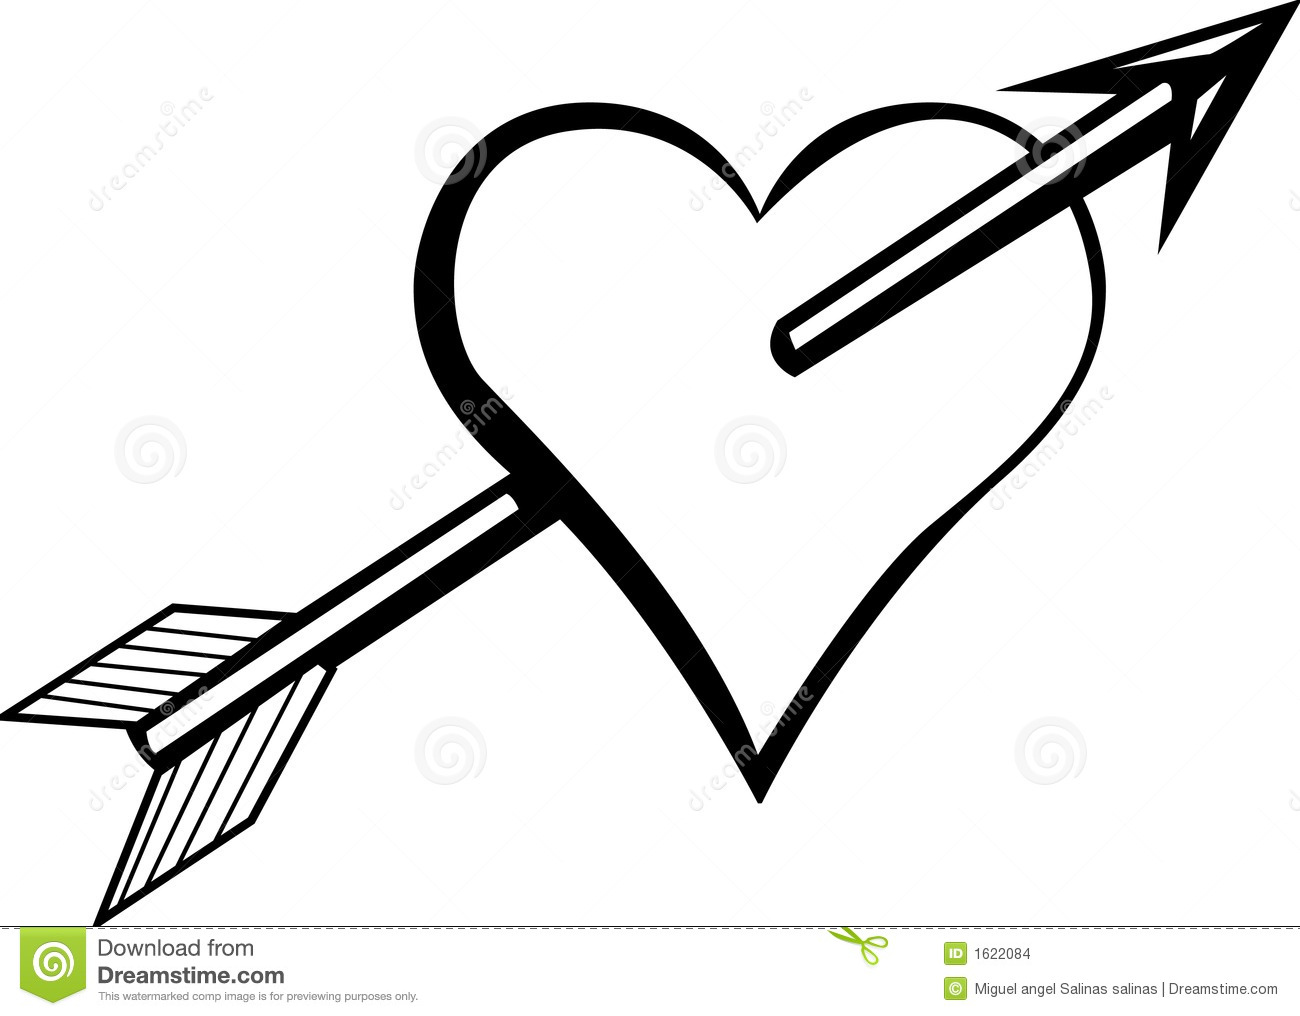 Heart With Arrow Vector Illustration Stock Images   Image  1622084